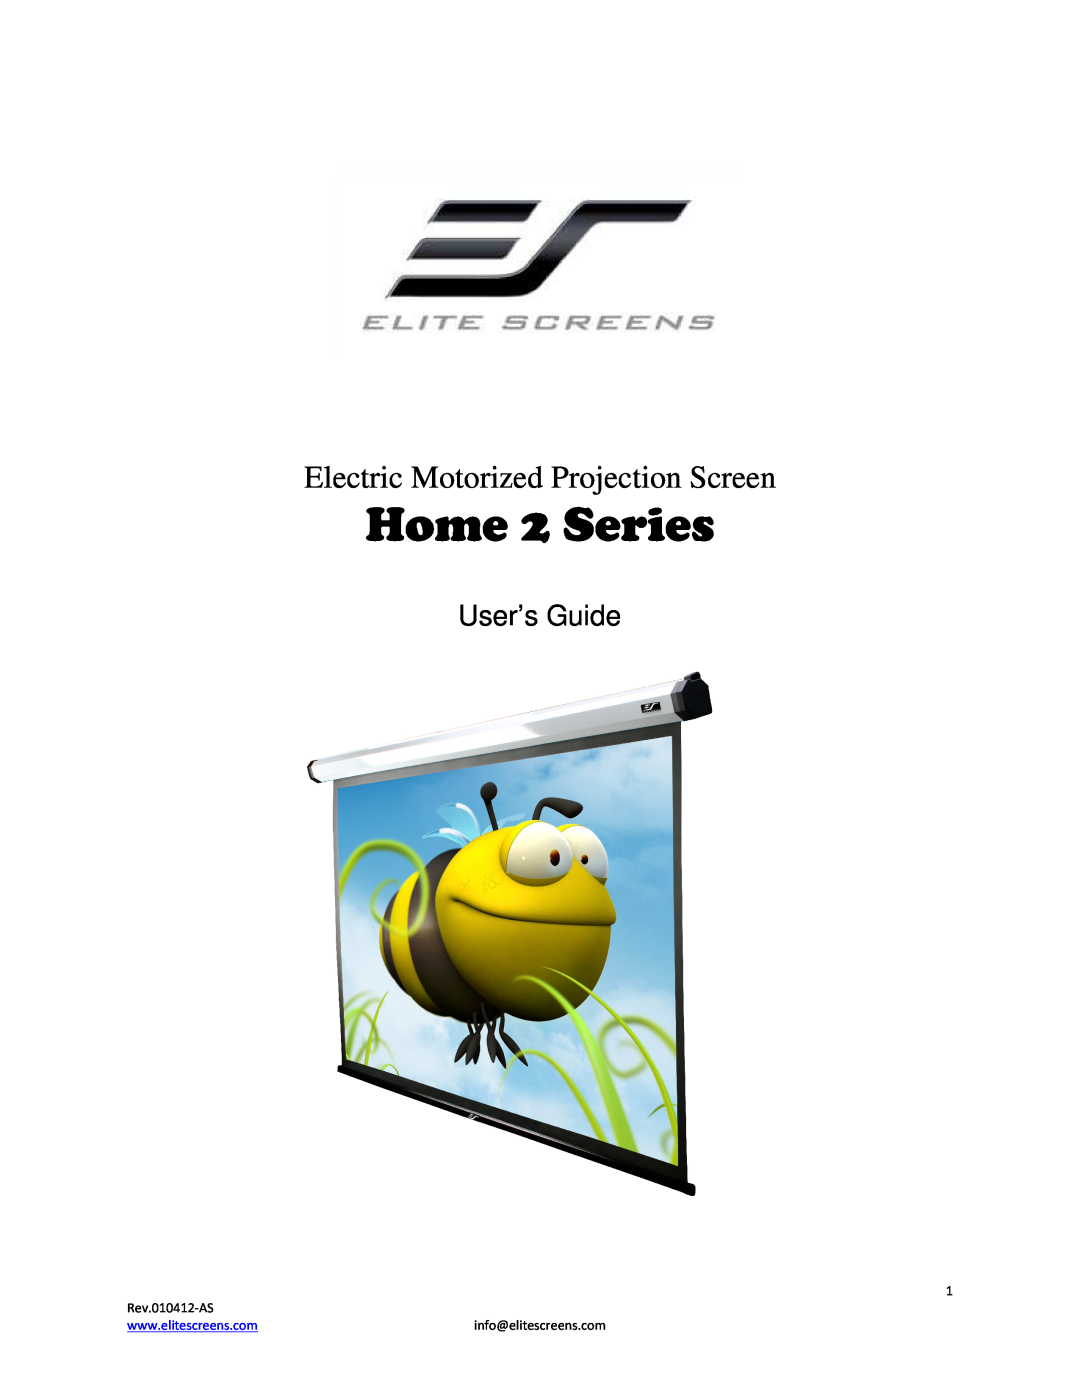 Elite Screens Home2 manual HOME 2 SERIES, Electric Motorized Projection Screen, User’s Guide, Rev.010412-AS 